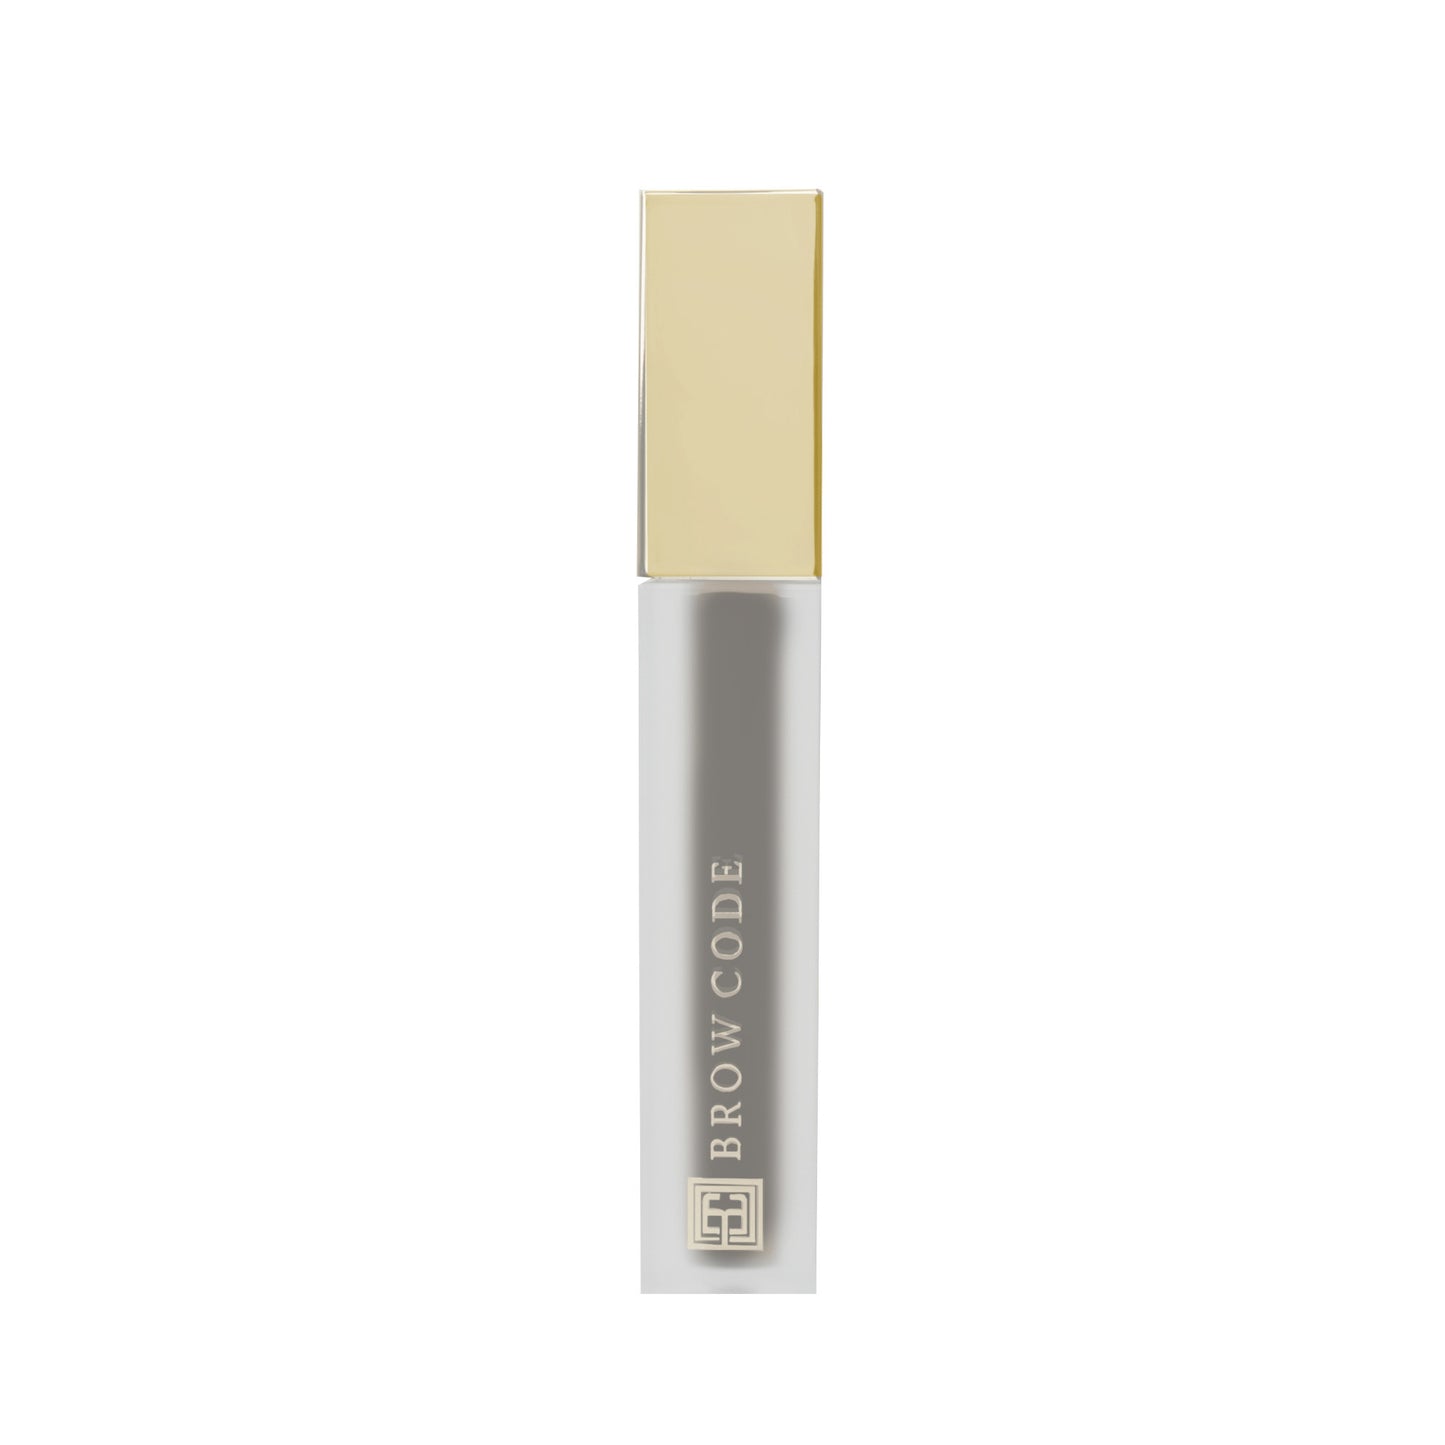 Tinted Multi-Peptide Brow Gel - Color-Dark Brown- product against a white background